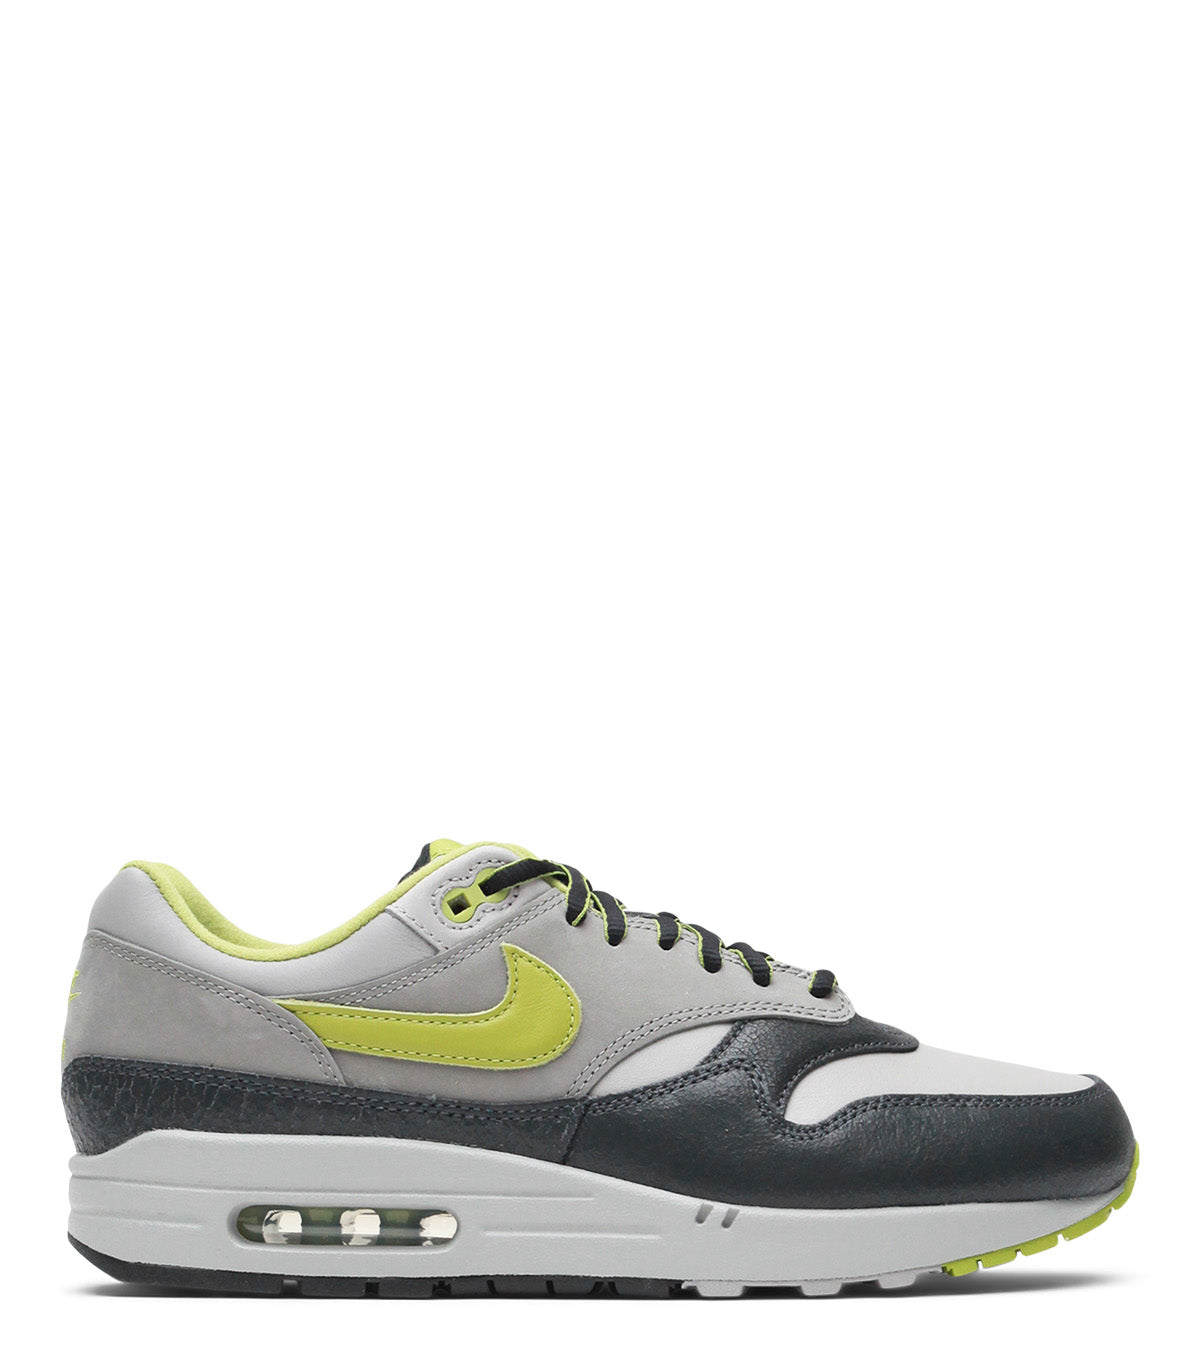 Nike x HUF Air Max 1 SP Anthracite Pear